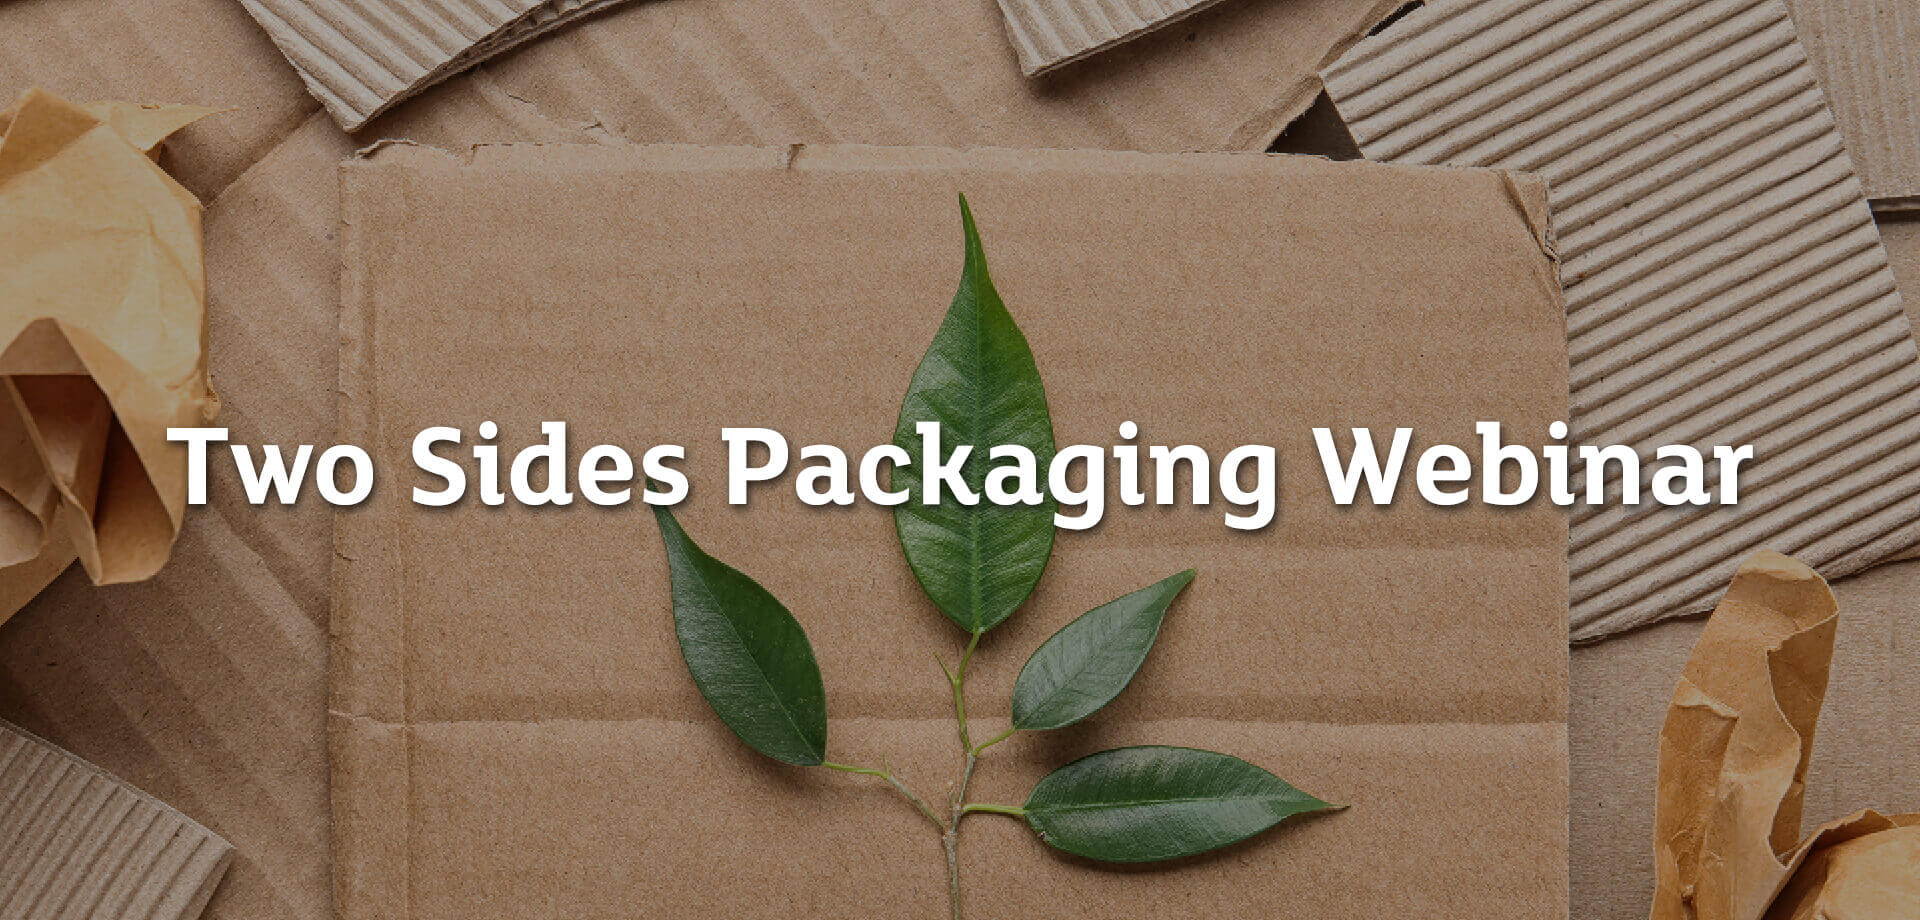 Two sides Webinar - Paper Packaging, The Sustainable Choice